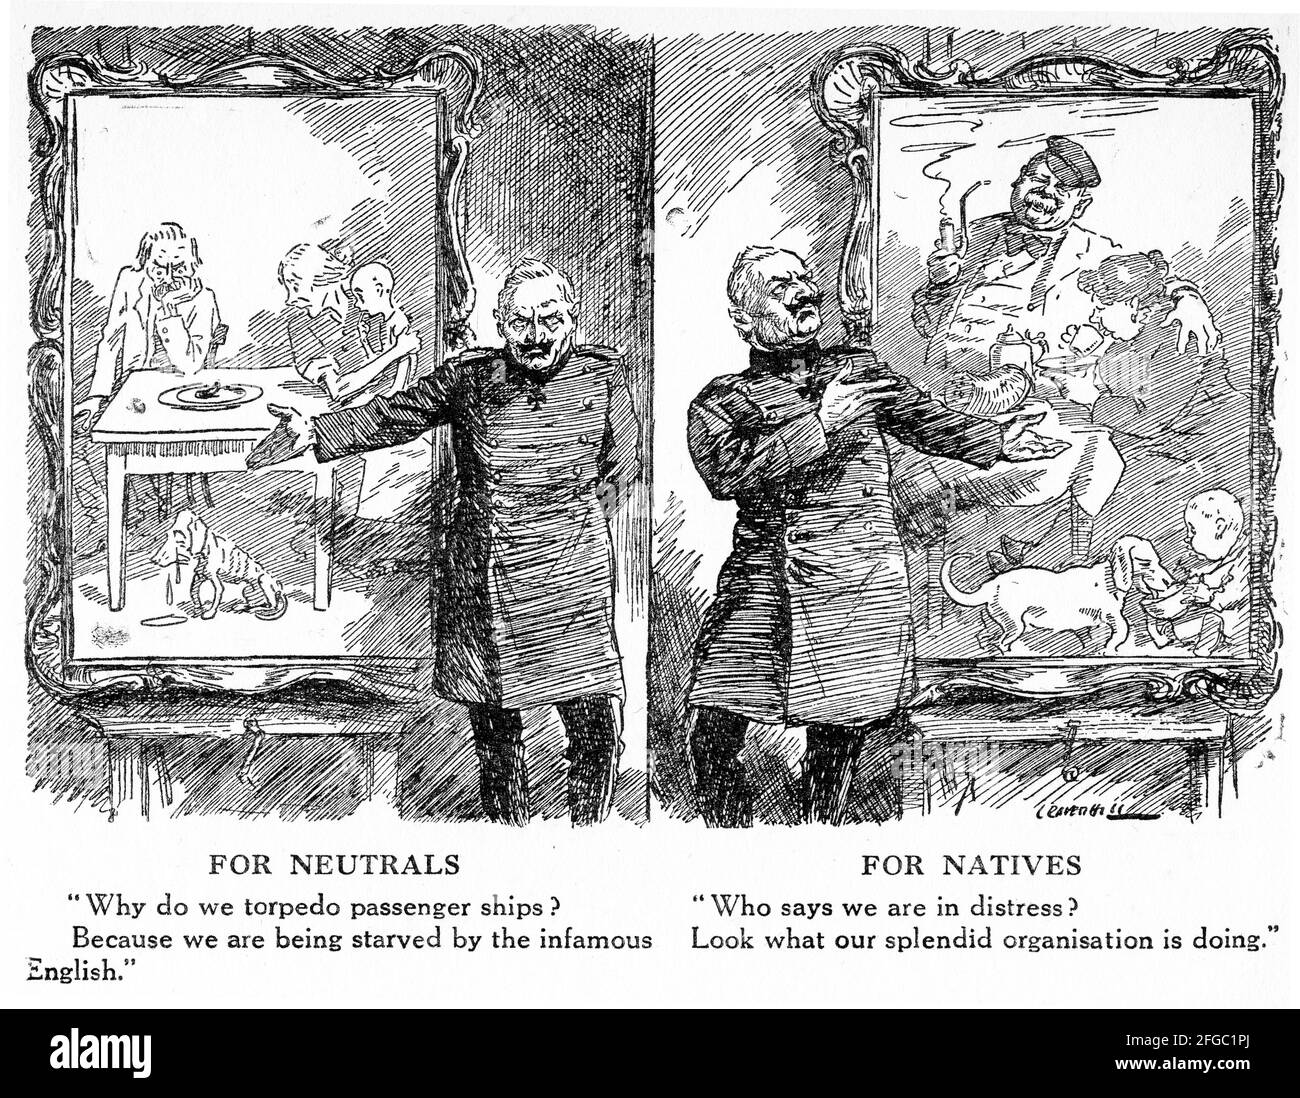 Engraving of a German politician giving two different stories for the sake of propaganda during World War One. From Punch magazine. Stock Photo